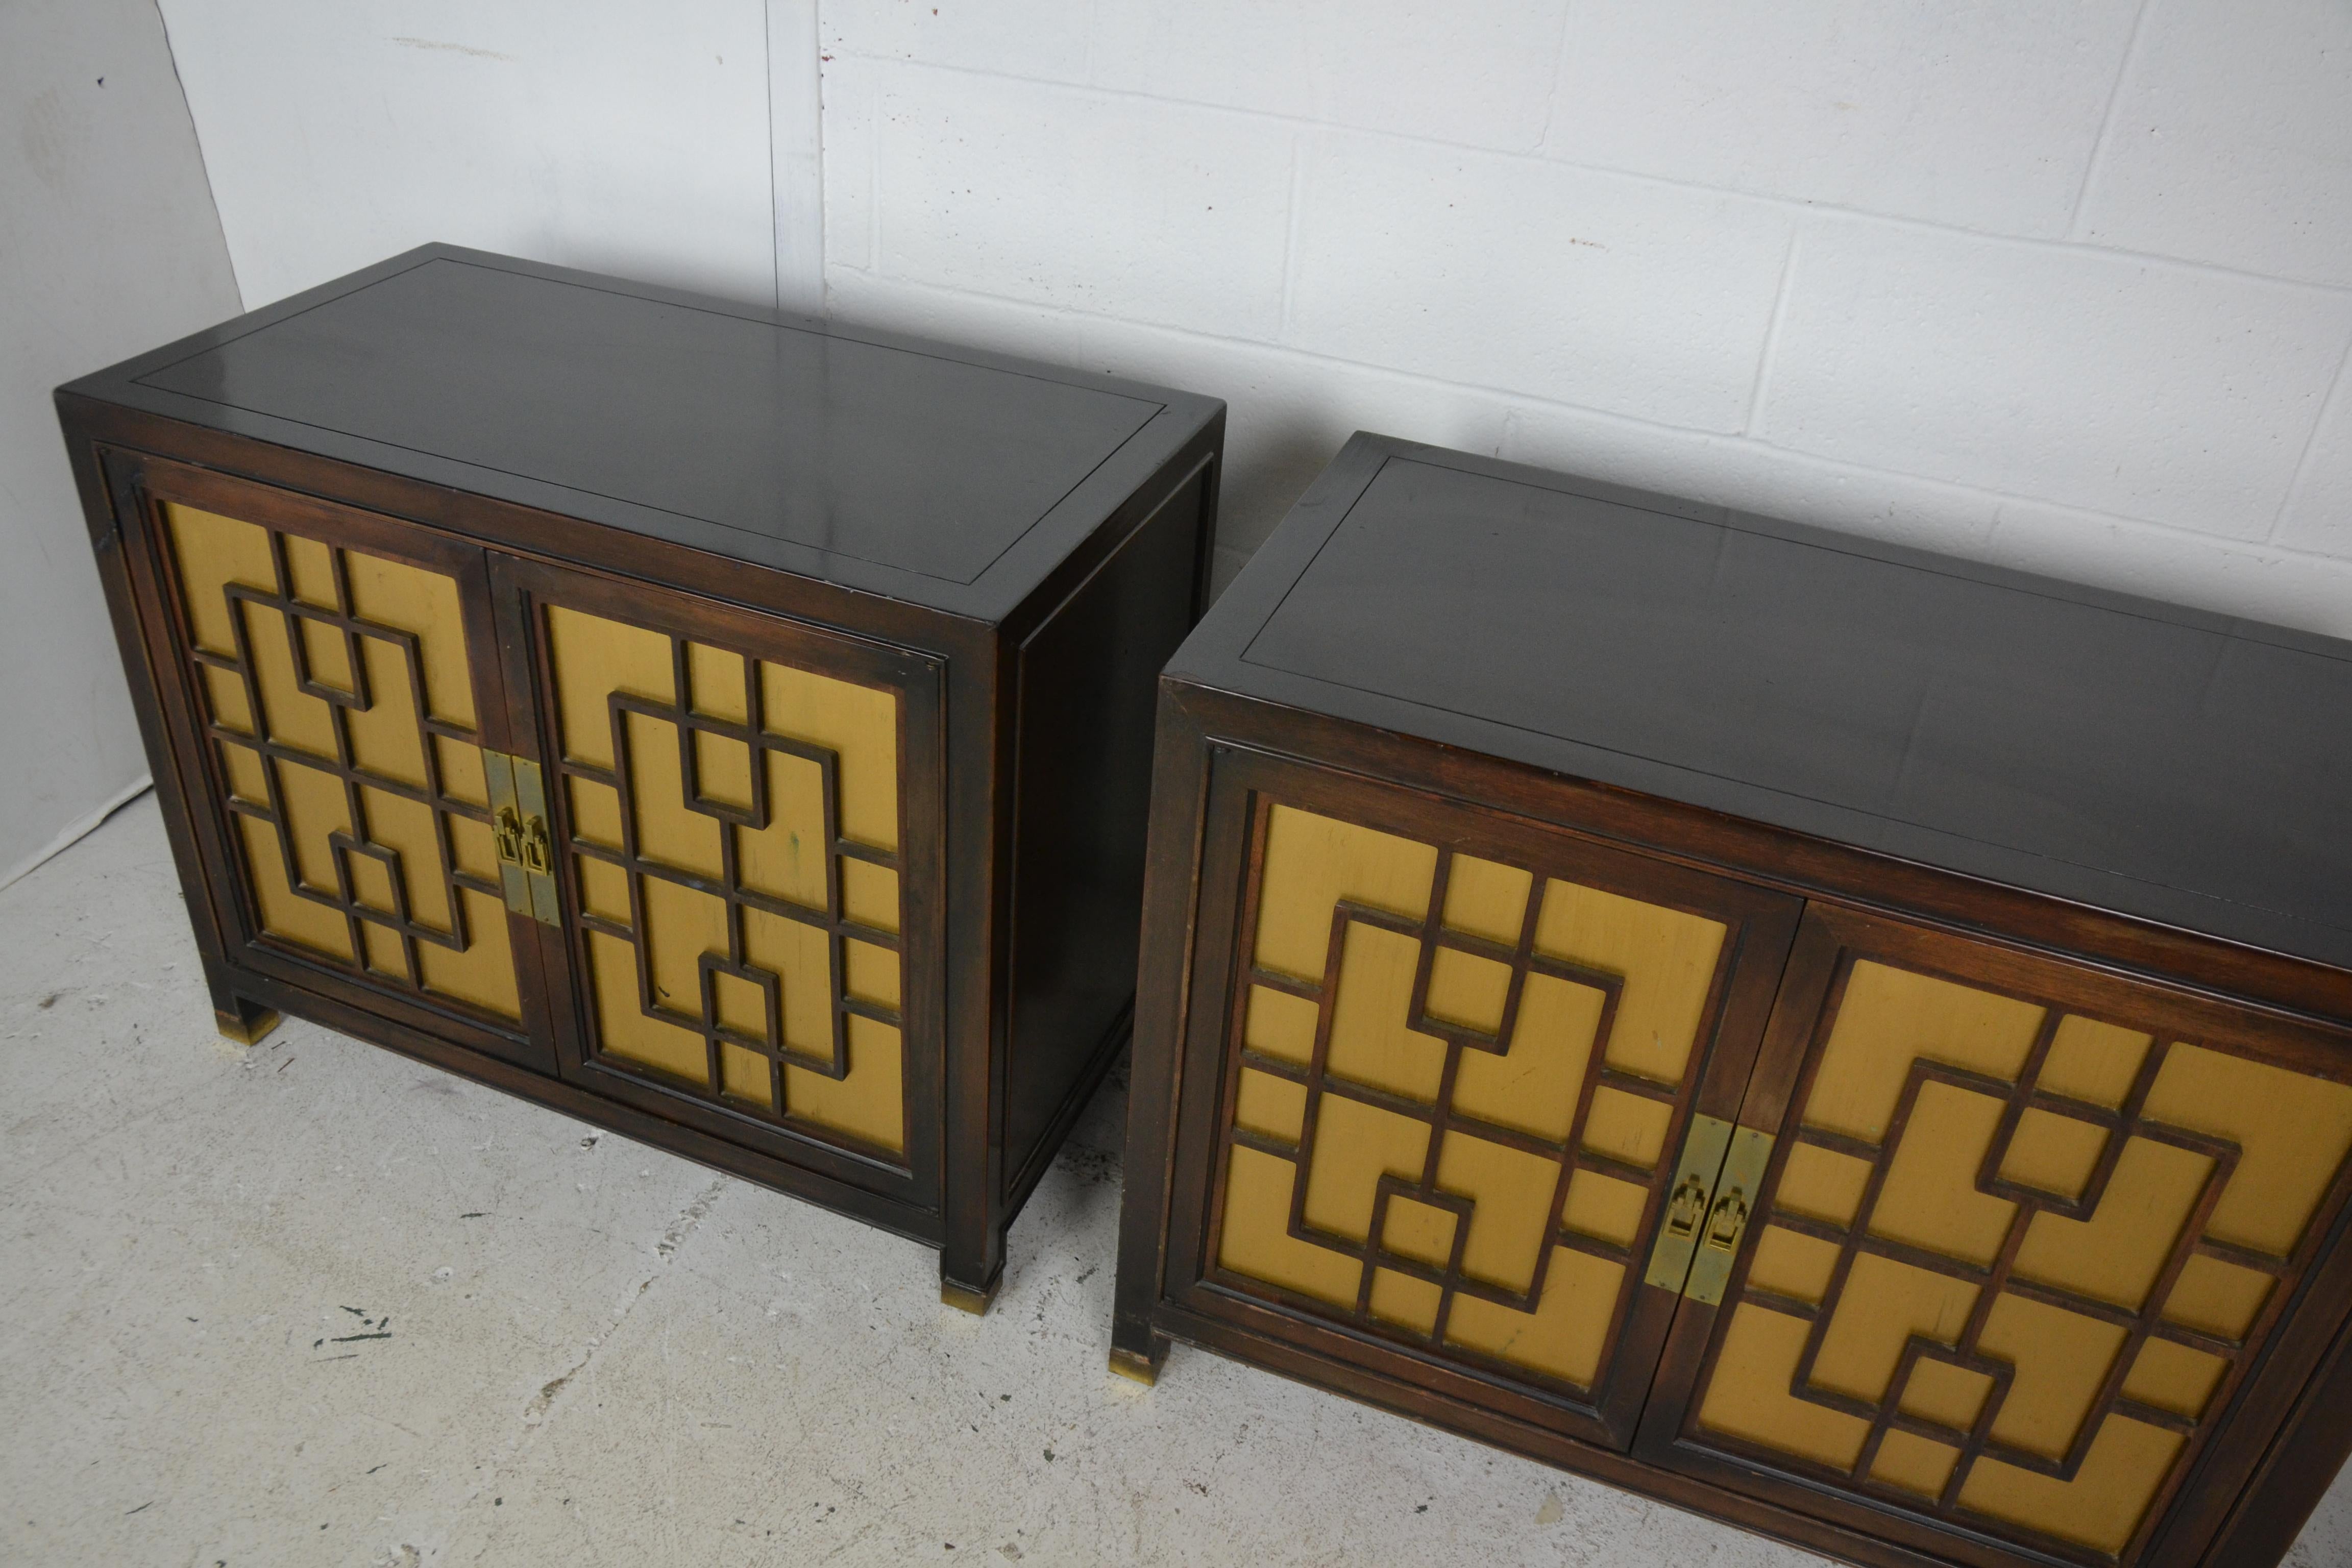 A pair of Chinese hardwood end tables or nightstands with traditional Chinese fretwork over gold painted panel doors. Brass toe caps and escutcheons.